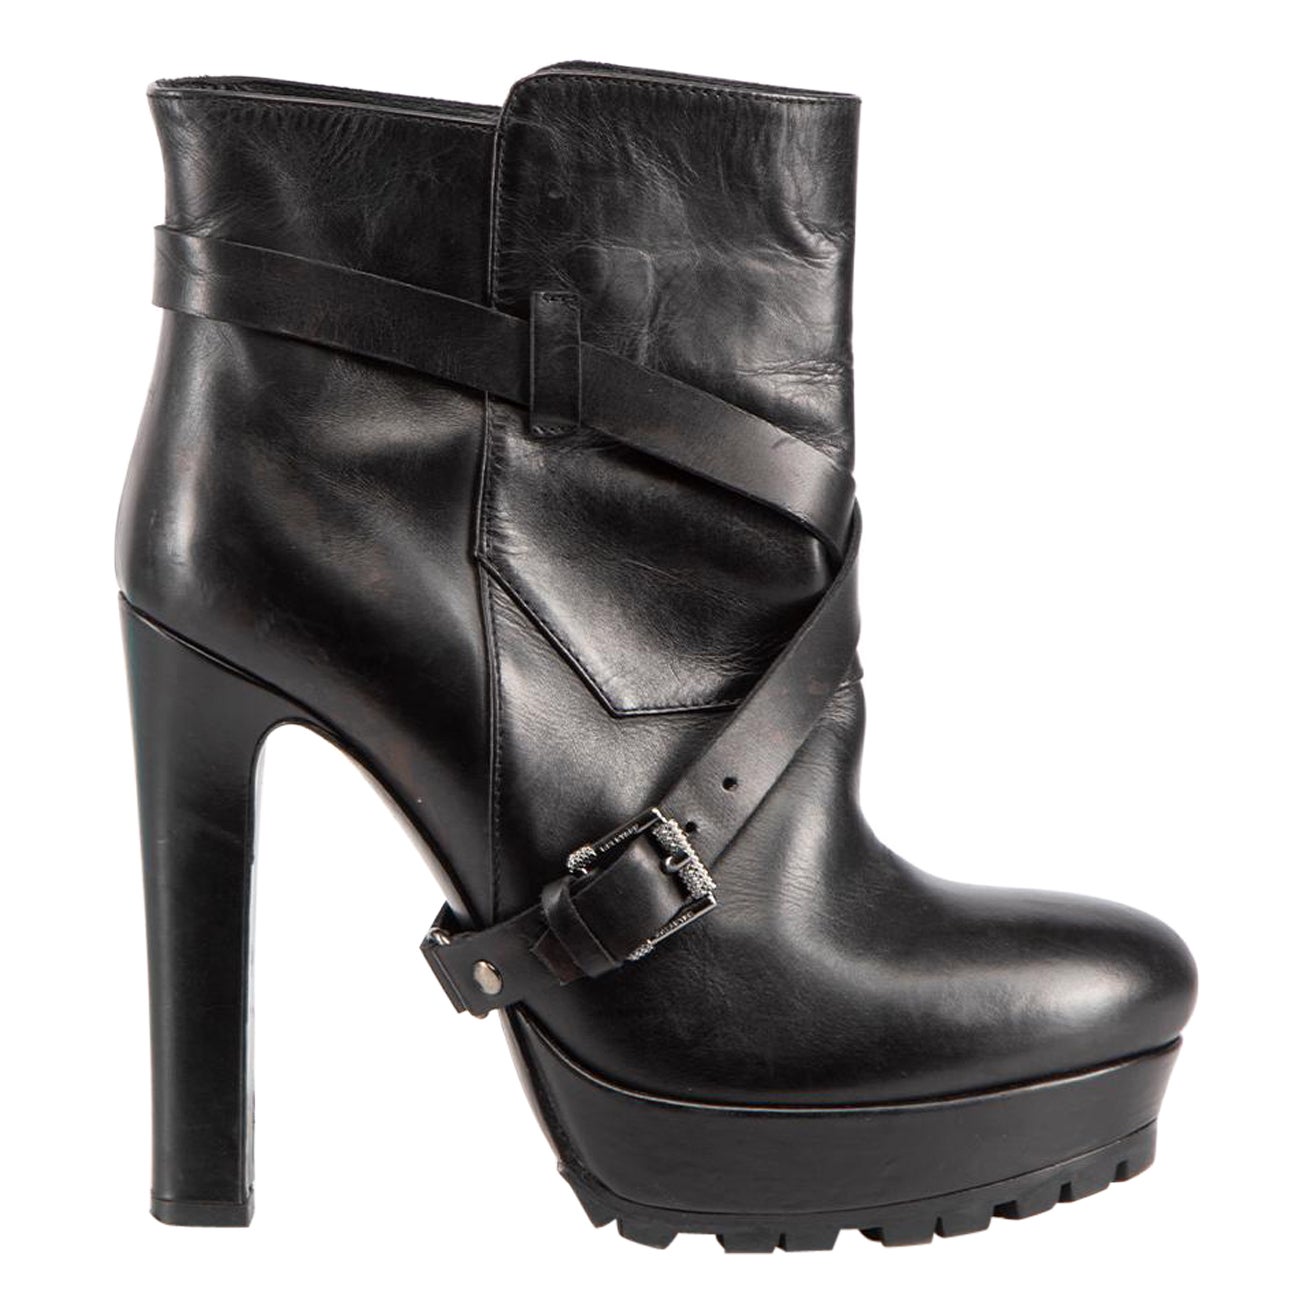 Belstaff Black Leather Buckle Strap Boots Size IT 36 For Sale